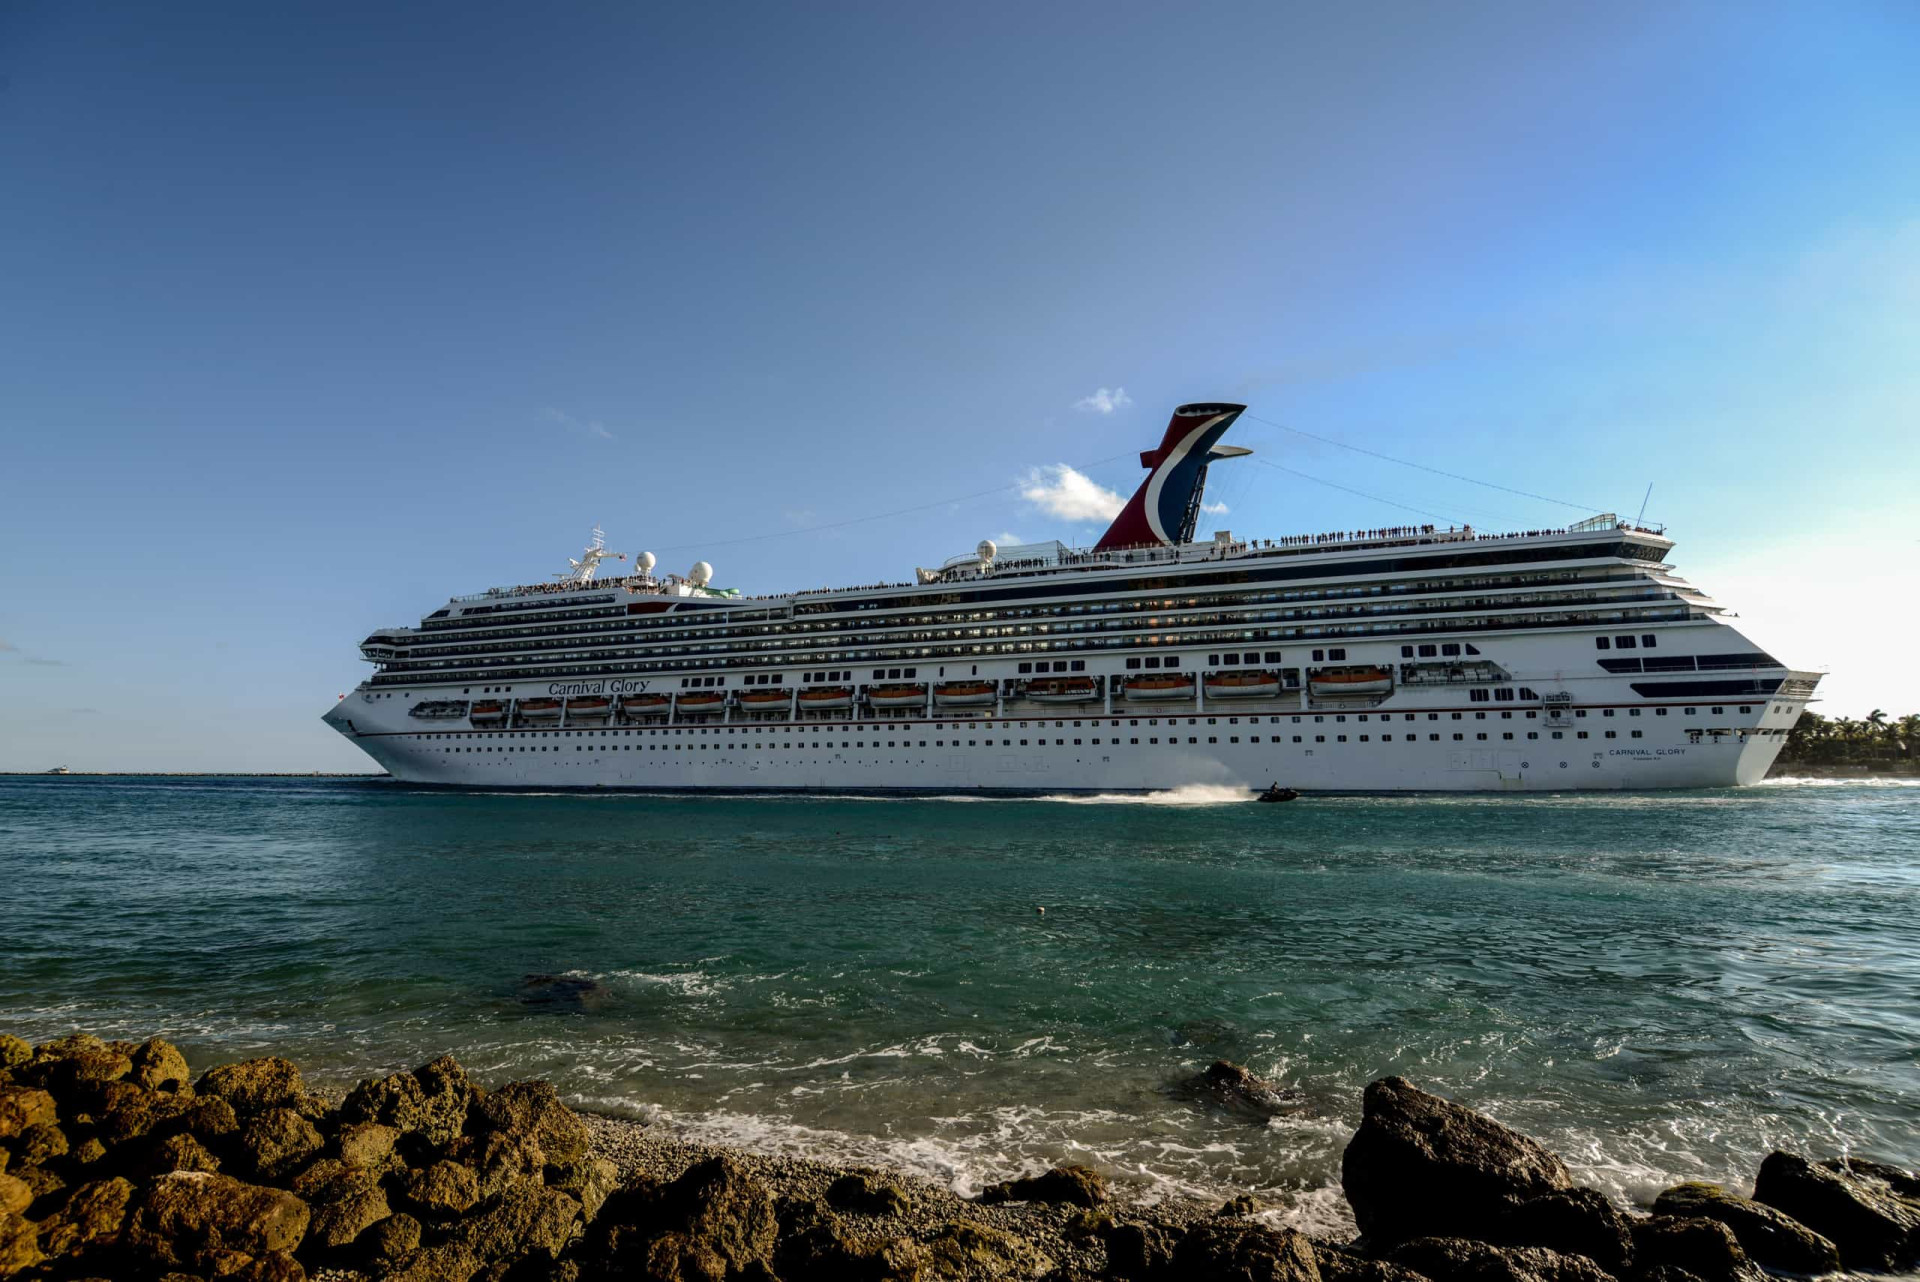 <p>A distressing cellphone video taken on the Carnival Valor cruise ship recorded the final chaotic moments of a 32-year-old woman's life. She was on a five-day voyage from New Orleans to Mexico with her husband when the incident unfolded. The footage apparently captures the aftermath of an unidentified incident in the hot tub. It shows three security guards restraining the woman by the poolside. She vigorously struggles to break free and repeatedly shouts the name "Alicia." The guards pin her arms behind her back, handcuff her, and then lead her away from the pool, up the stairs. Witnesses relay that a short while later, she successfully evades the guards and jumps off the ship's tenth floor into the sea. Immediate rescue efforts ensue, although it is surmised that the woman struck her during the fall, causing her to immediately disappear under the water's surface. The coast guard diligently scoured an extensive area of 2,514 square miles (6,511 square kilometers) for 14 hours before eventually suspending their search.</p><p><a href="https://www.msn.com/en-us/community/channel/vid-7xx8mnucu55yw63we9va2gwr7uihbxwc68fxqp25x6tg4ftibpra?cvid=94631541bc0f4f89bfd59158d696ad7e">Follow us and access great exclusive content every day</a></p>